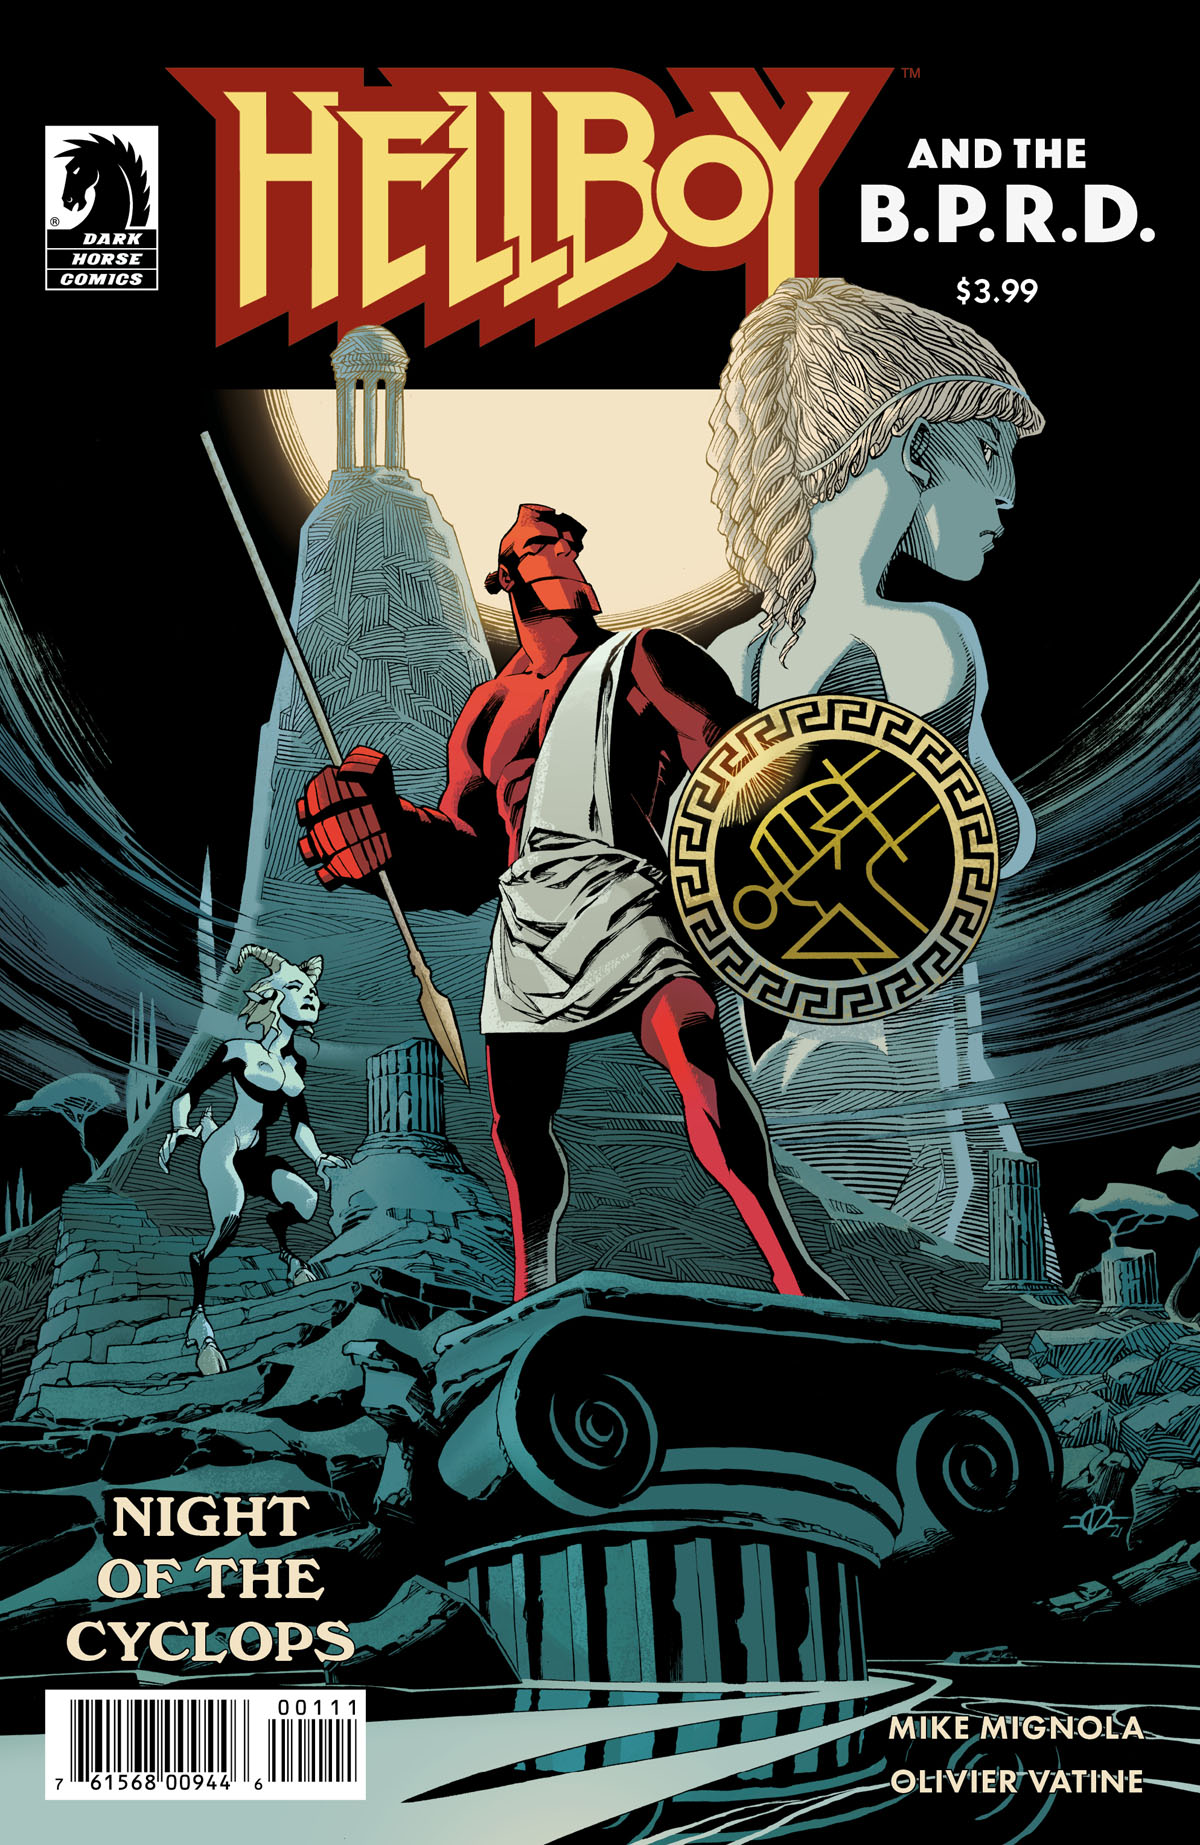 Hellboy and the B.P.R.D.: Night of the Cyclops cover